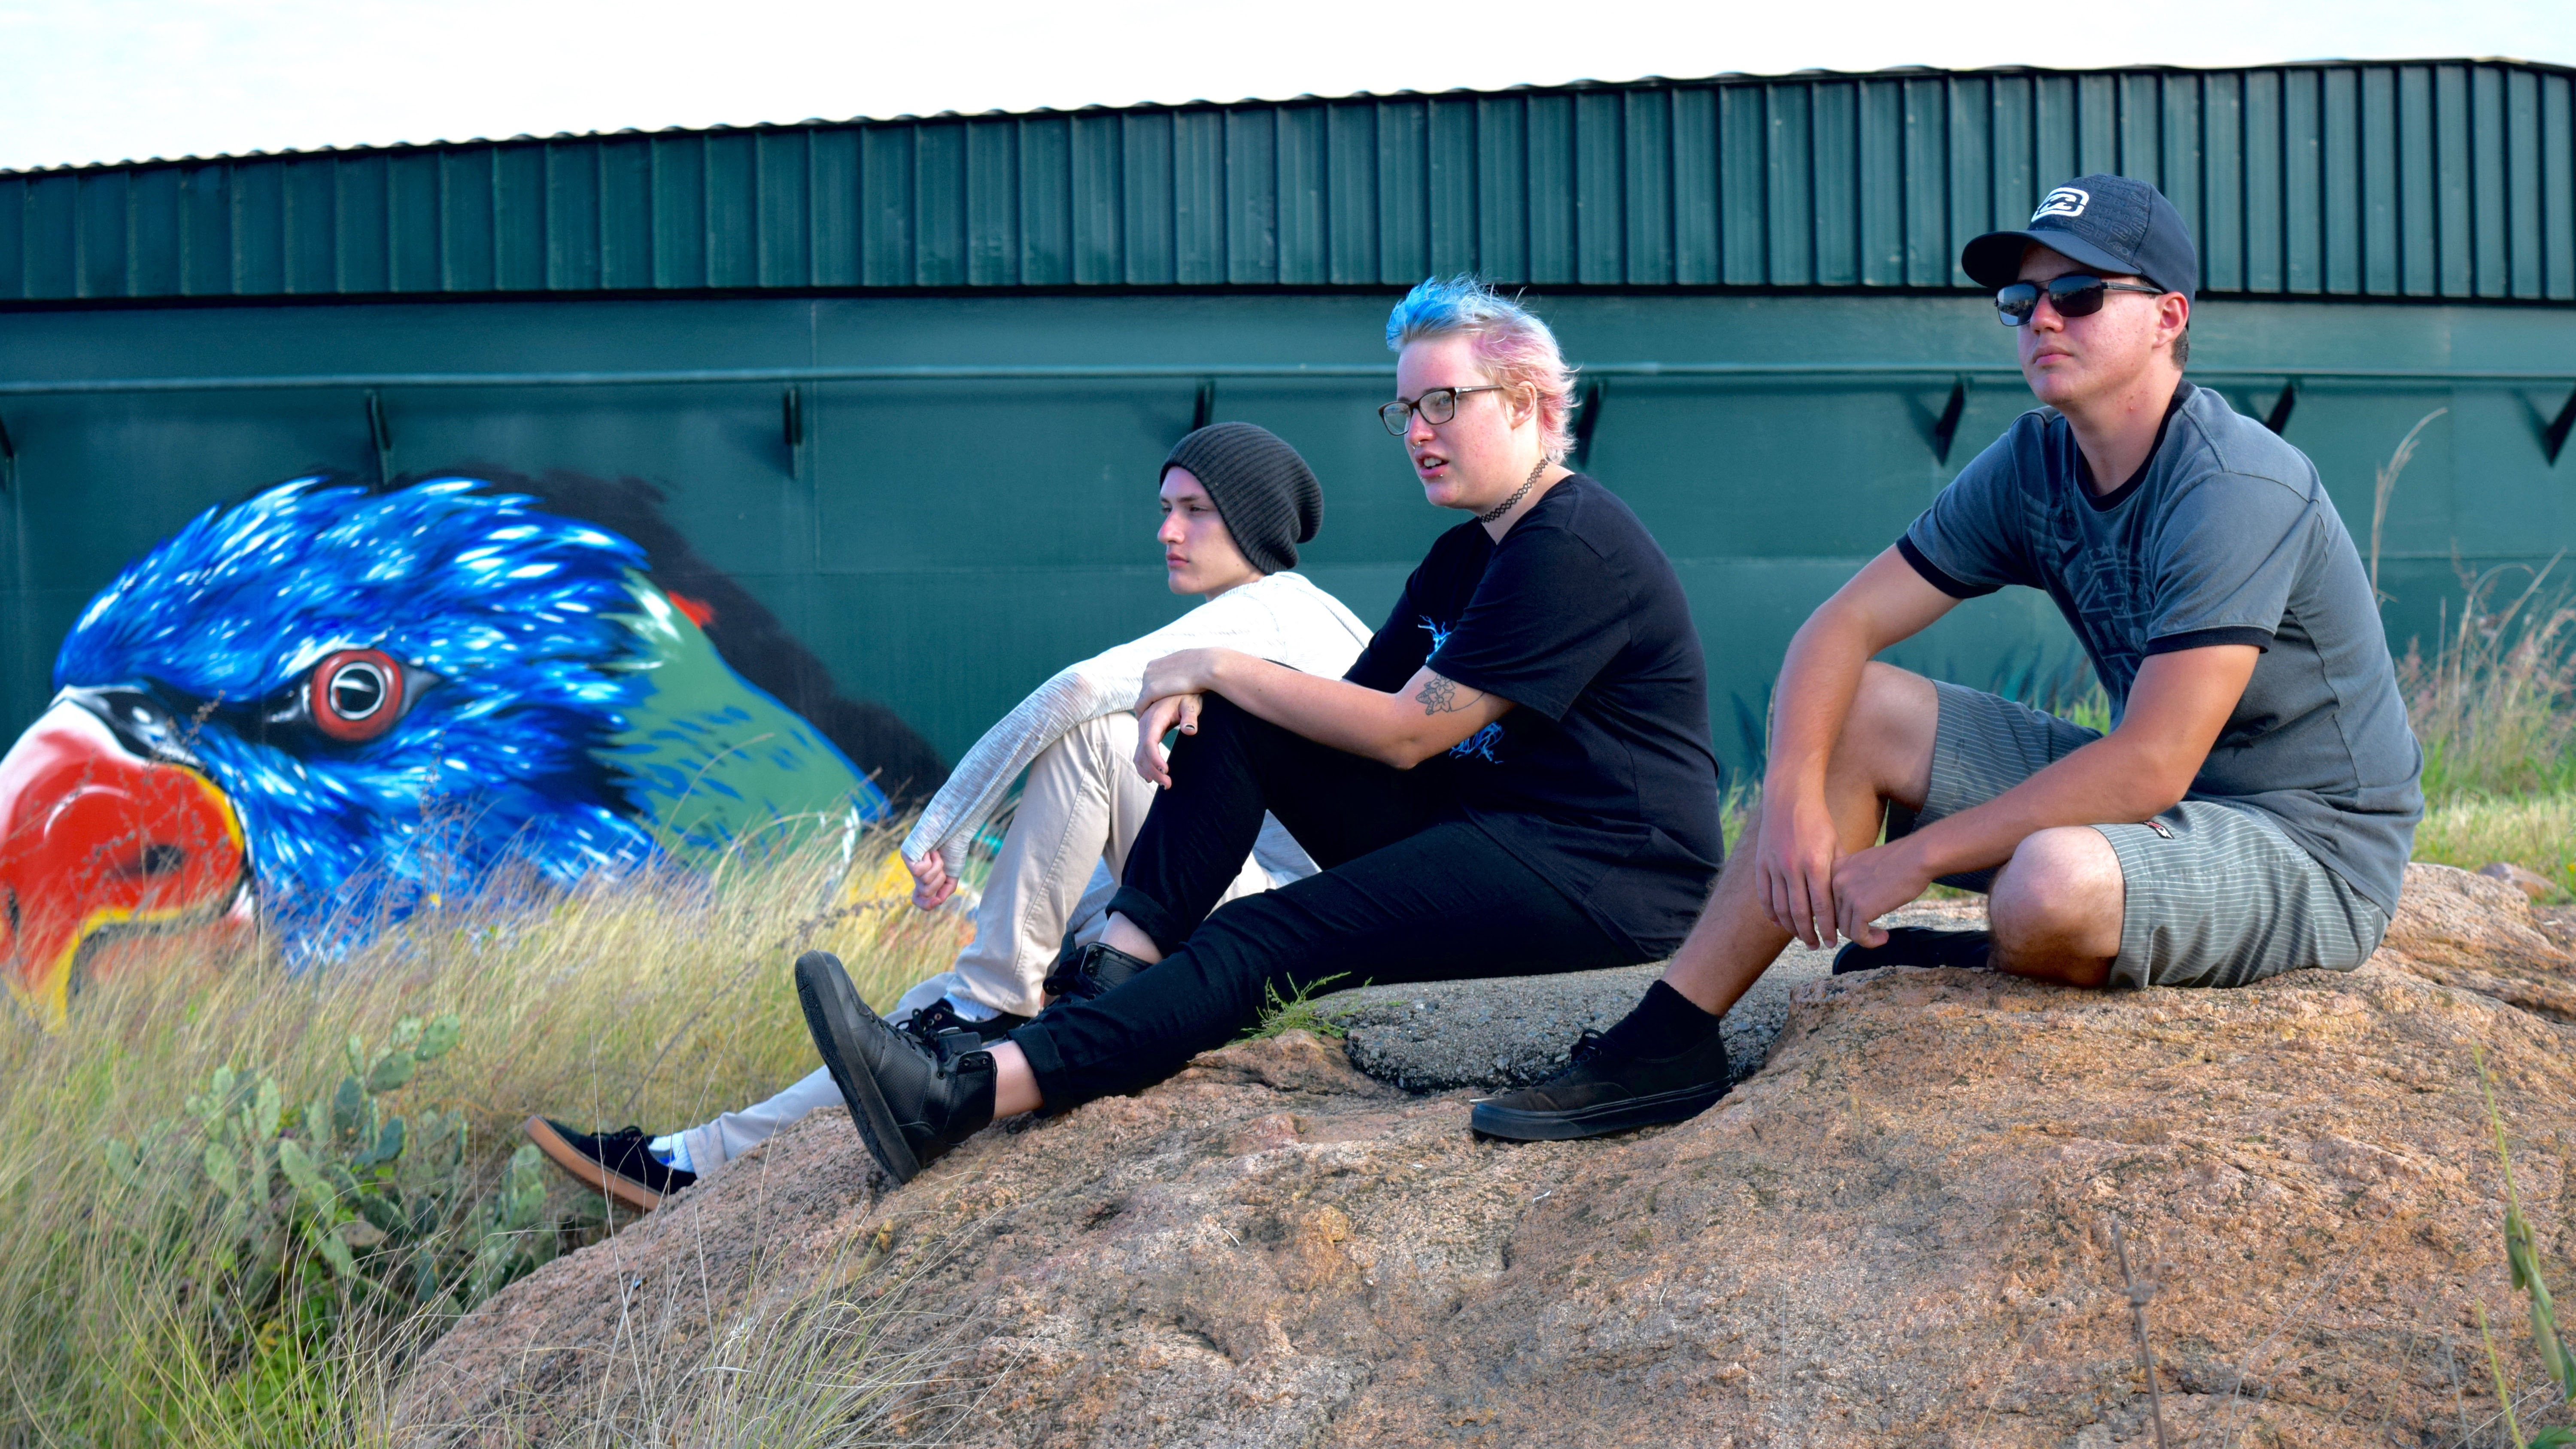 Three young people sit on a rock in front of a wall painted with graffiti.